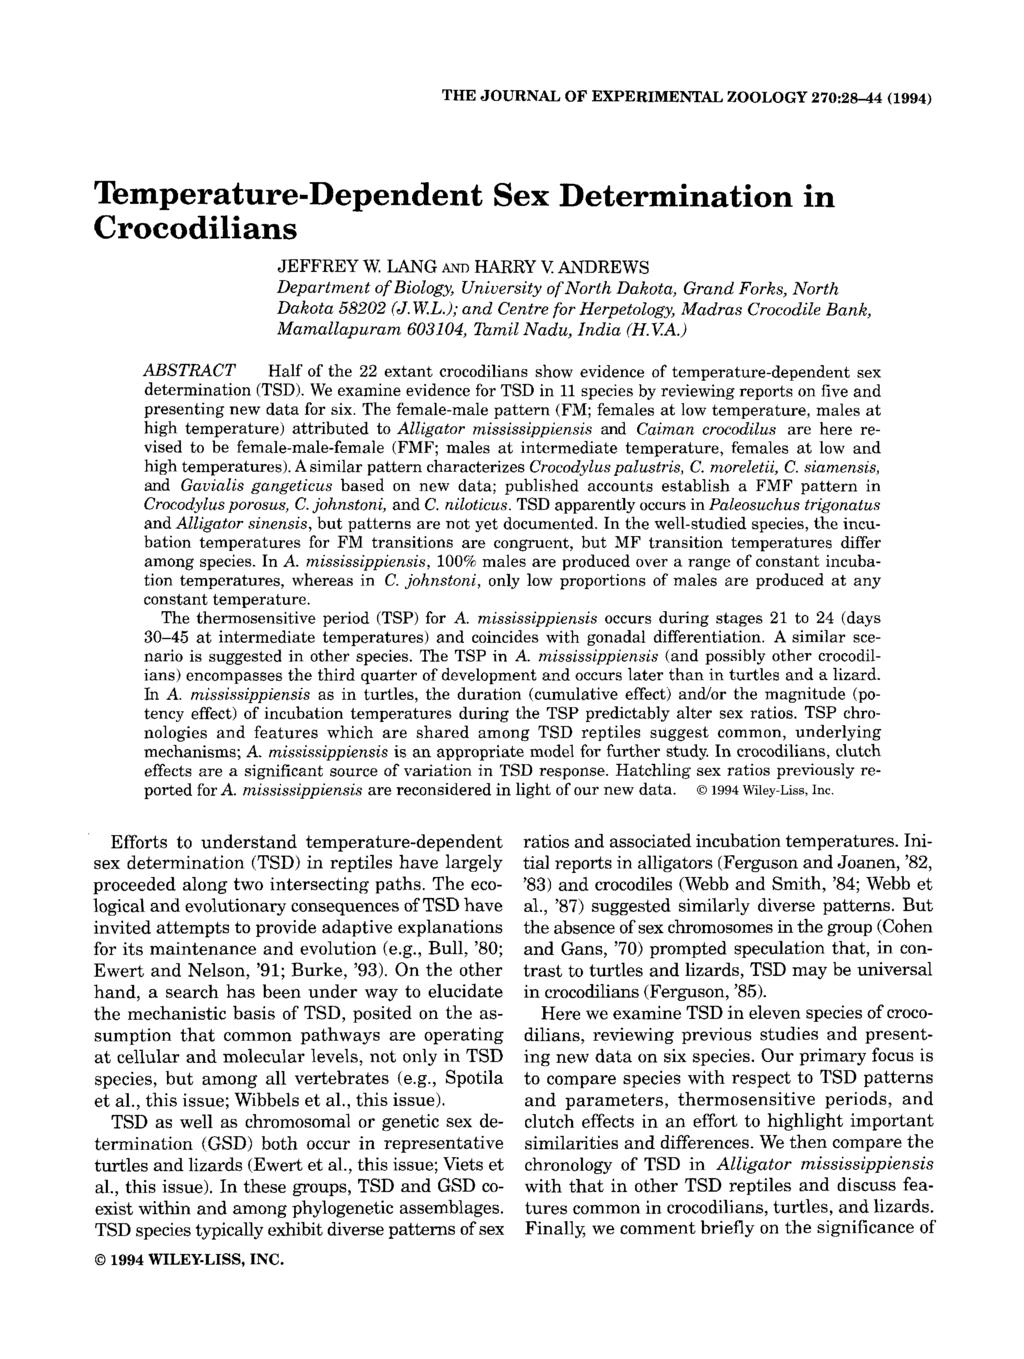 THE JOURNAL OF EXPERIMENTAL ZOOLOGY 270:28-44 (1994) Temperature-Dependent Sex Determination in Crocodilians JEFFREY W. LANG AND HARRY V.